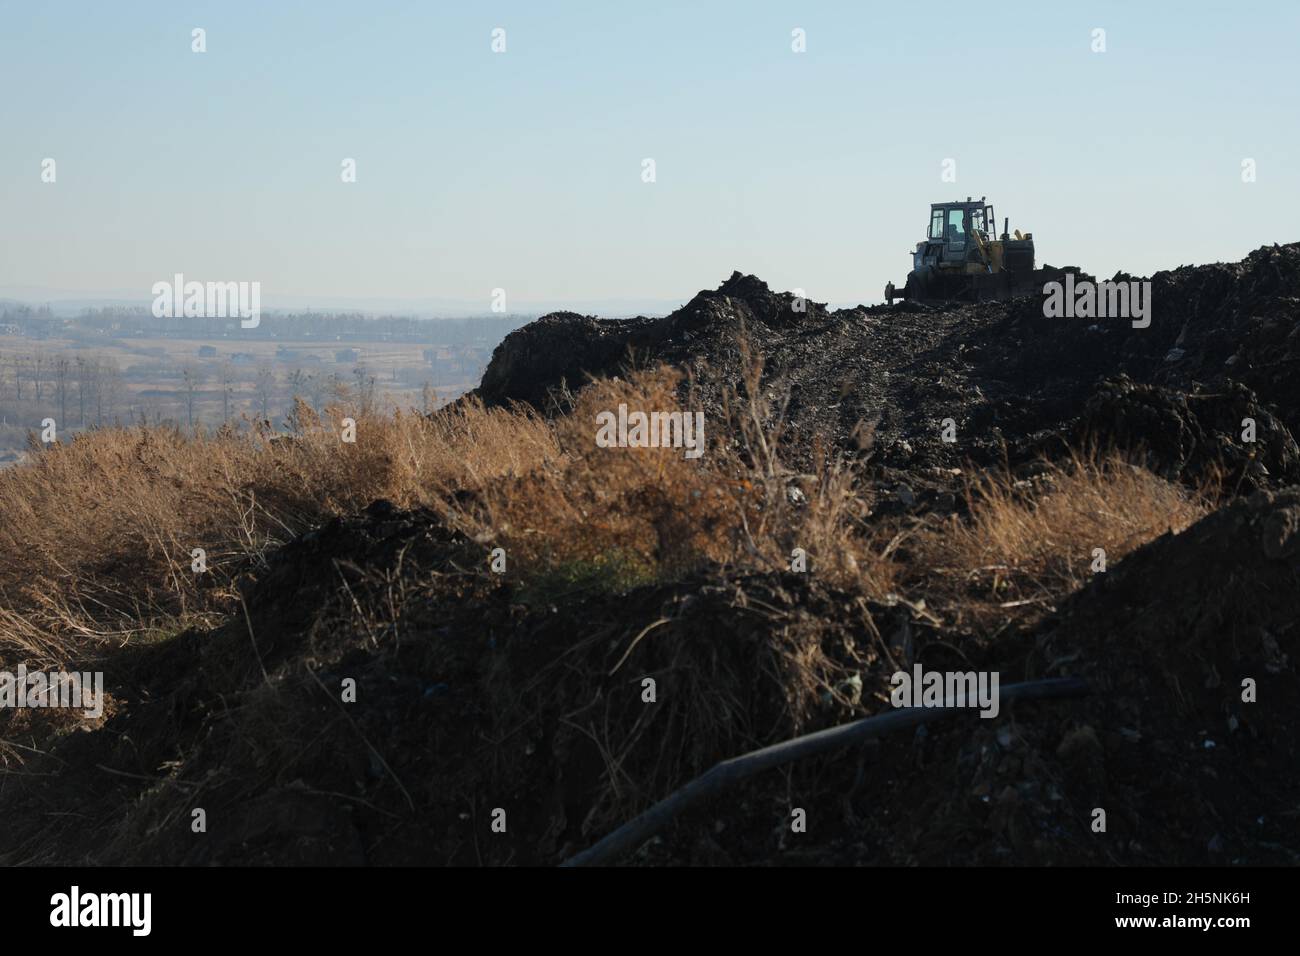 An excavator seen at the Hrybovytchi landfill which is under reclamation (artificial restoration of soil fertility and vegetation after man-made disturbance of nature). The only legal place for garbage collection from Lviv and surrounding villages. It has been operating since 1958 close to the village of Velyki Hrybovychi. The landfill area is over 38 hectares. On May 28, 2016, a large fire broke out on the territory of the Hrybovytsia landfill causing a collapse of solid waste where three rescuers died under the rubble. (Photo by Mykola Tys/SOPA Images/Sipa USA) Stock Photo